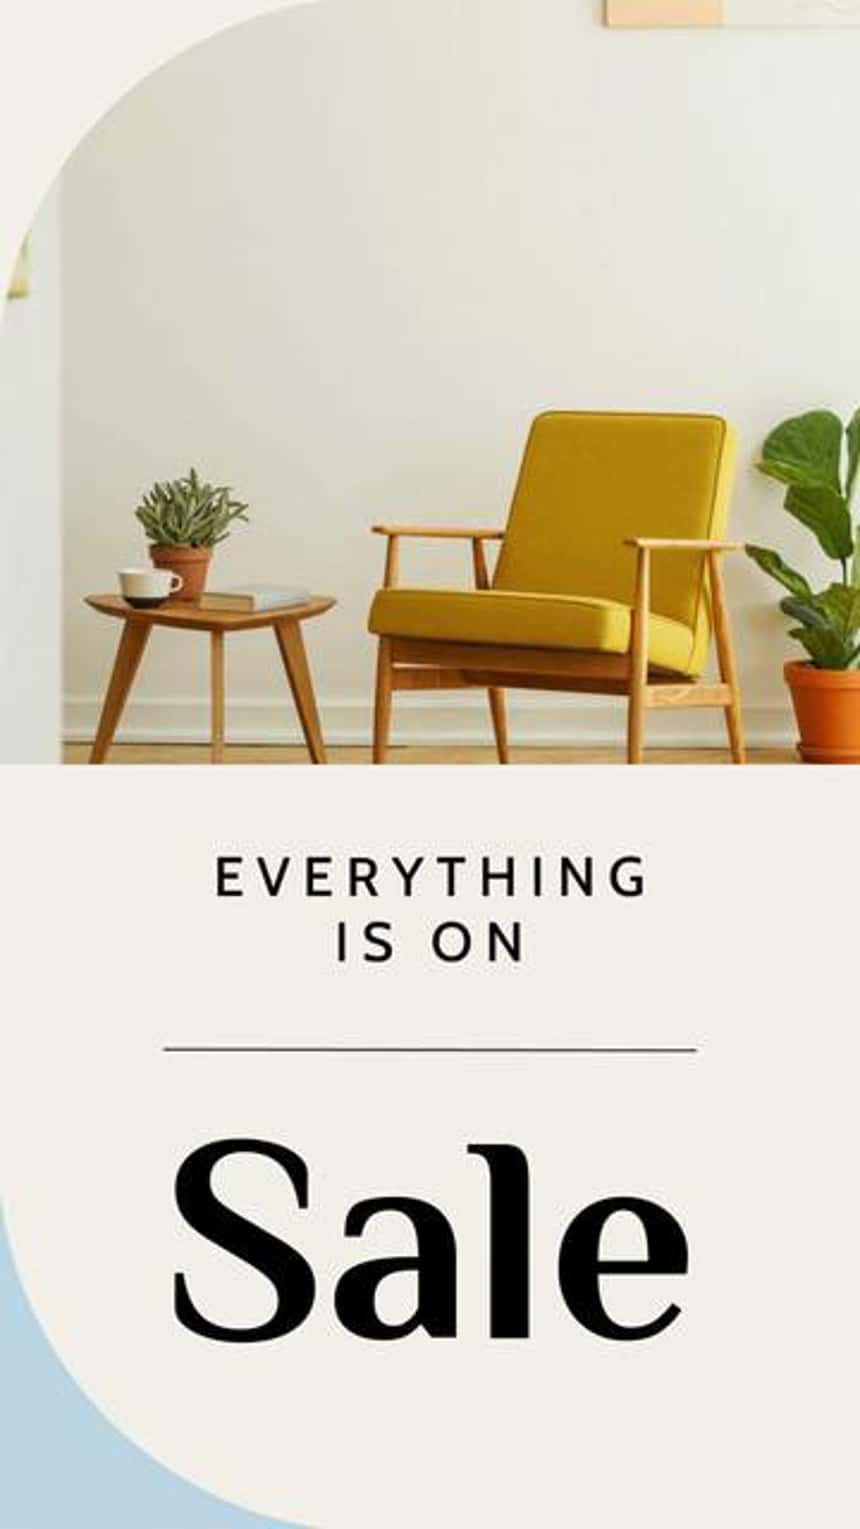 Instagram video ad template for a furniture business featuring an image of a yellow chair, plants, and side table. Text on image reads 